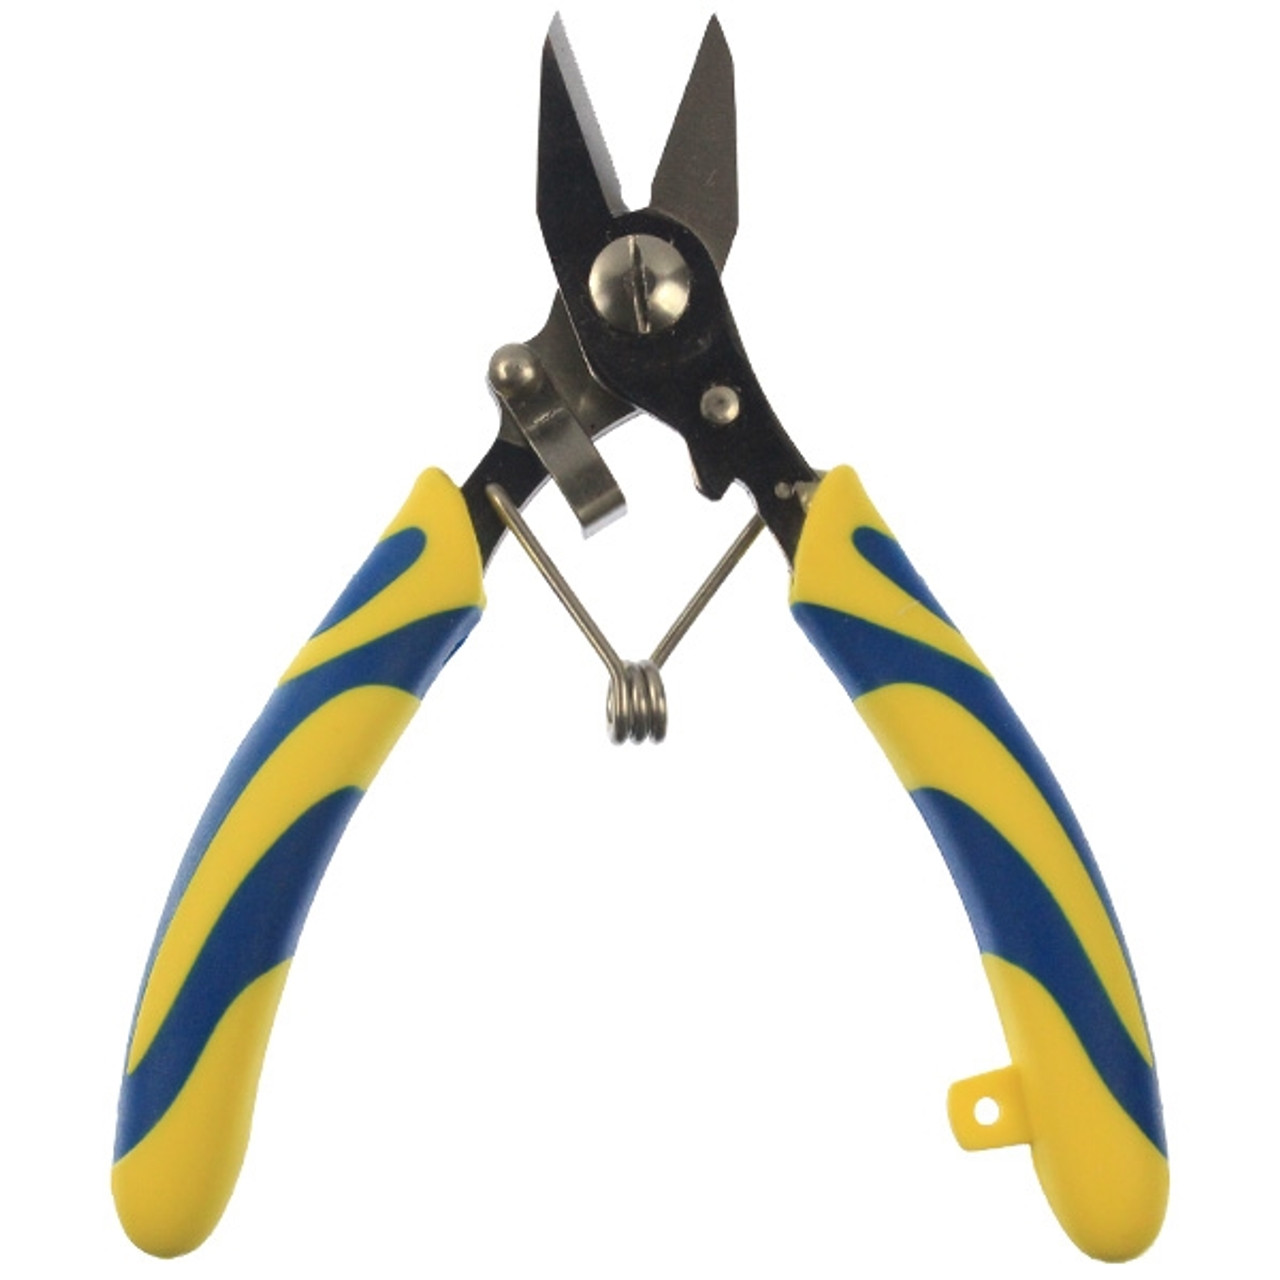 Pitbull Tackle Braided Line Cutter, Fishing Line Cutter